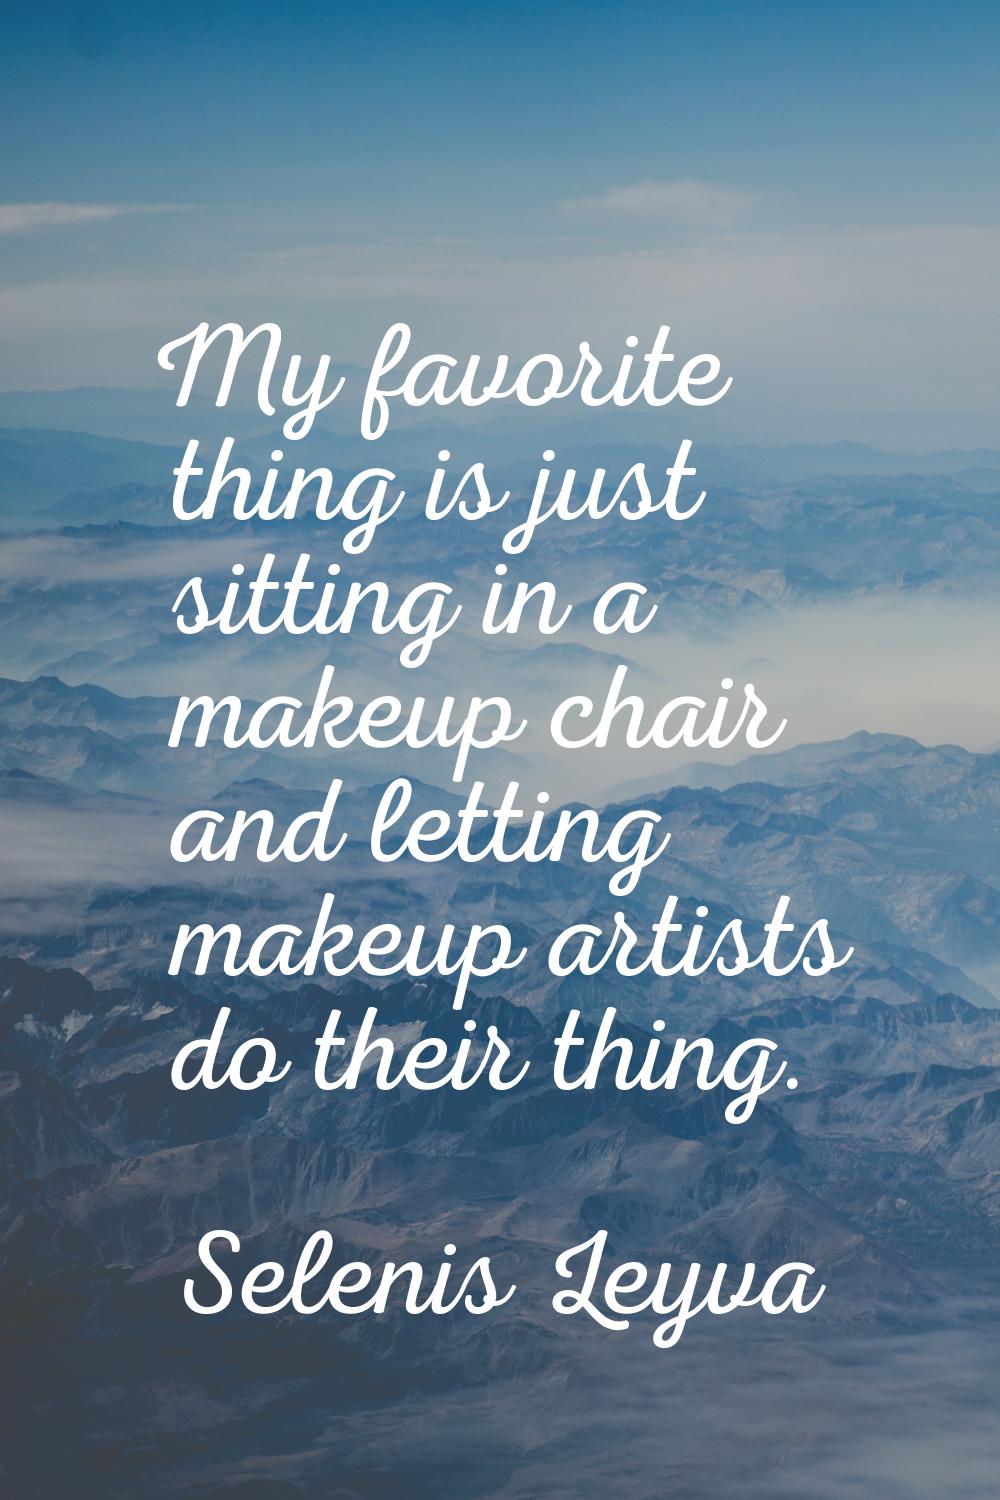 My favorite thing is just sitting in a makeup chair and letting makeup artists do their thing.